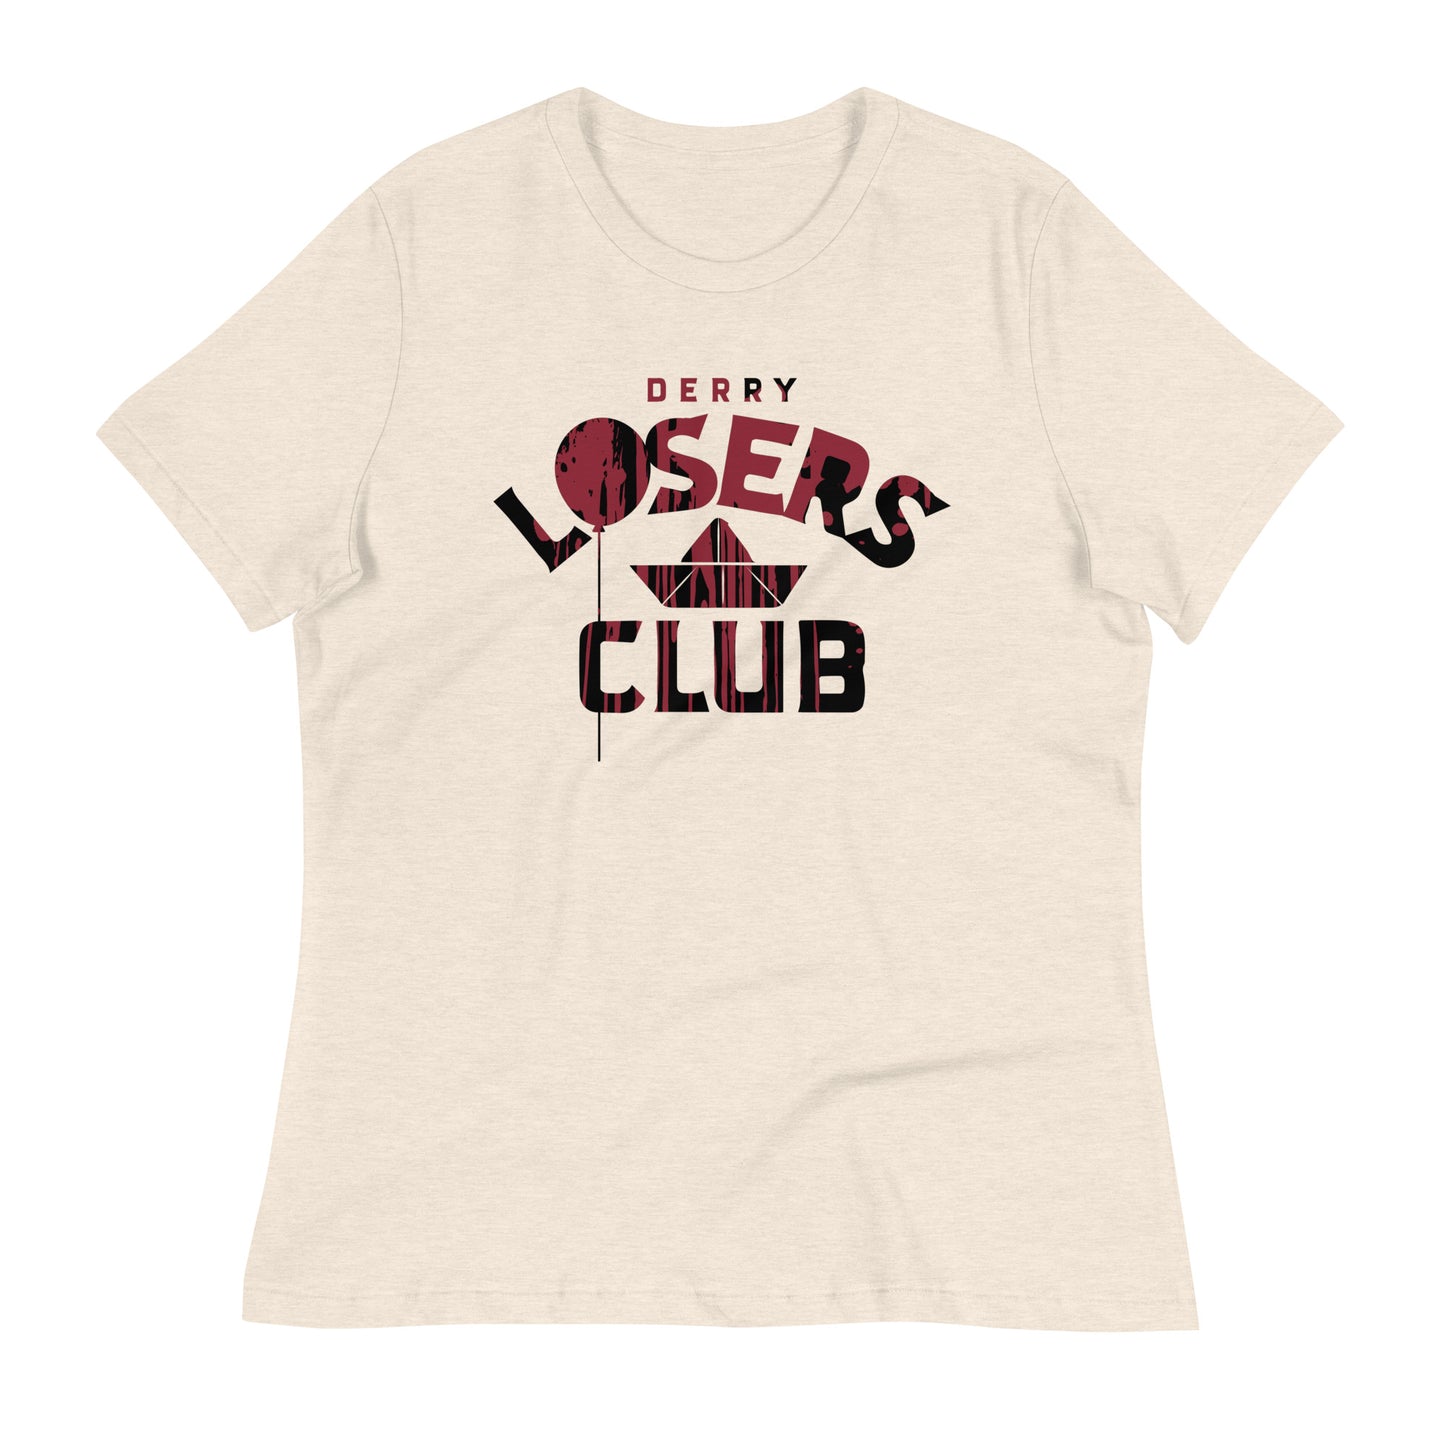 Derry Losers Club Women's Signature Tee